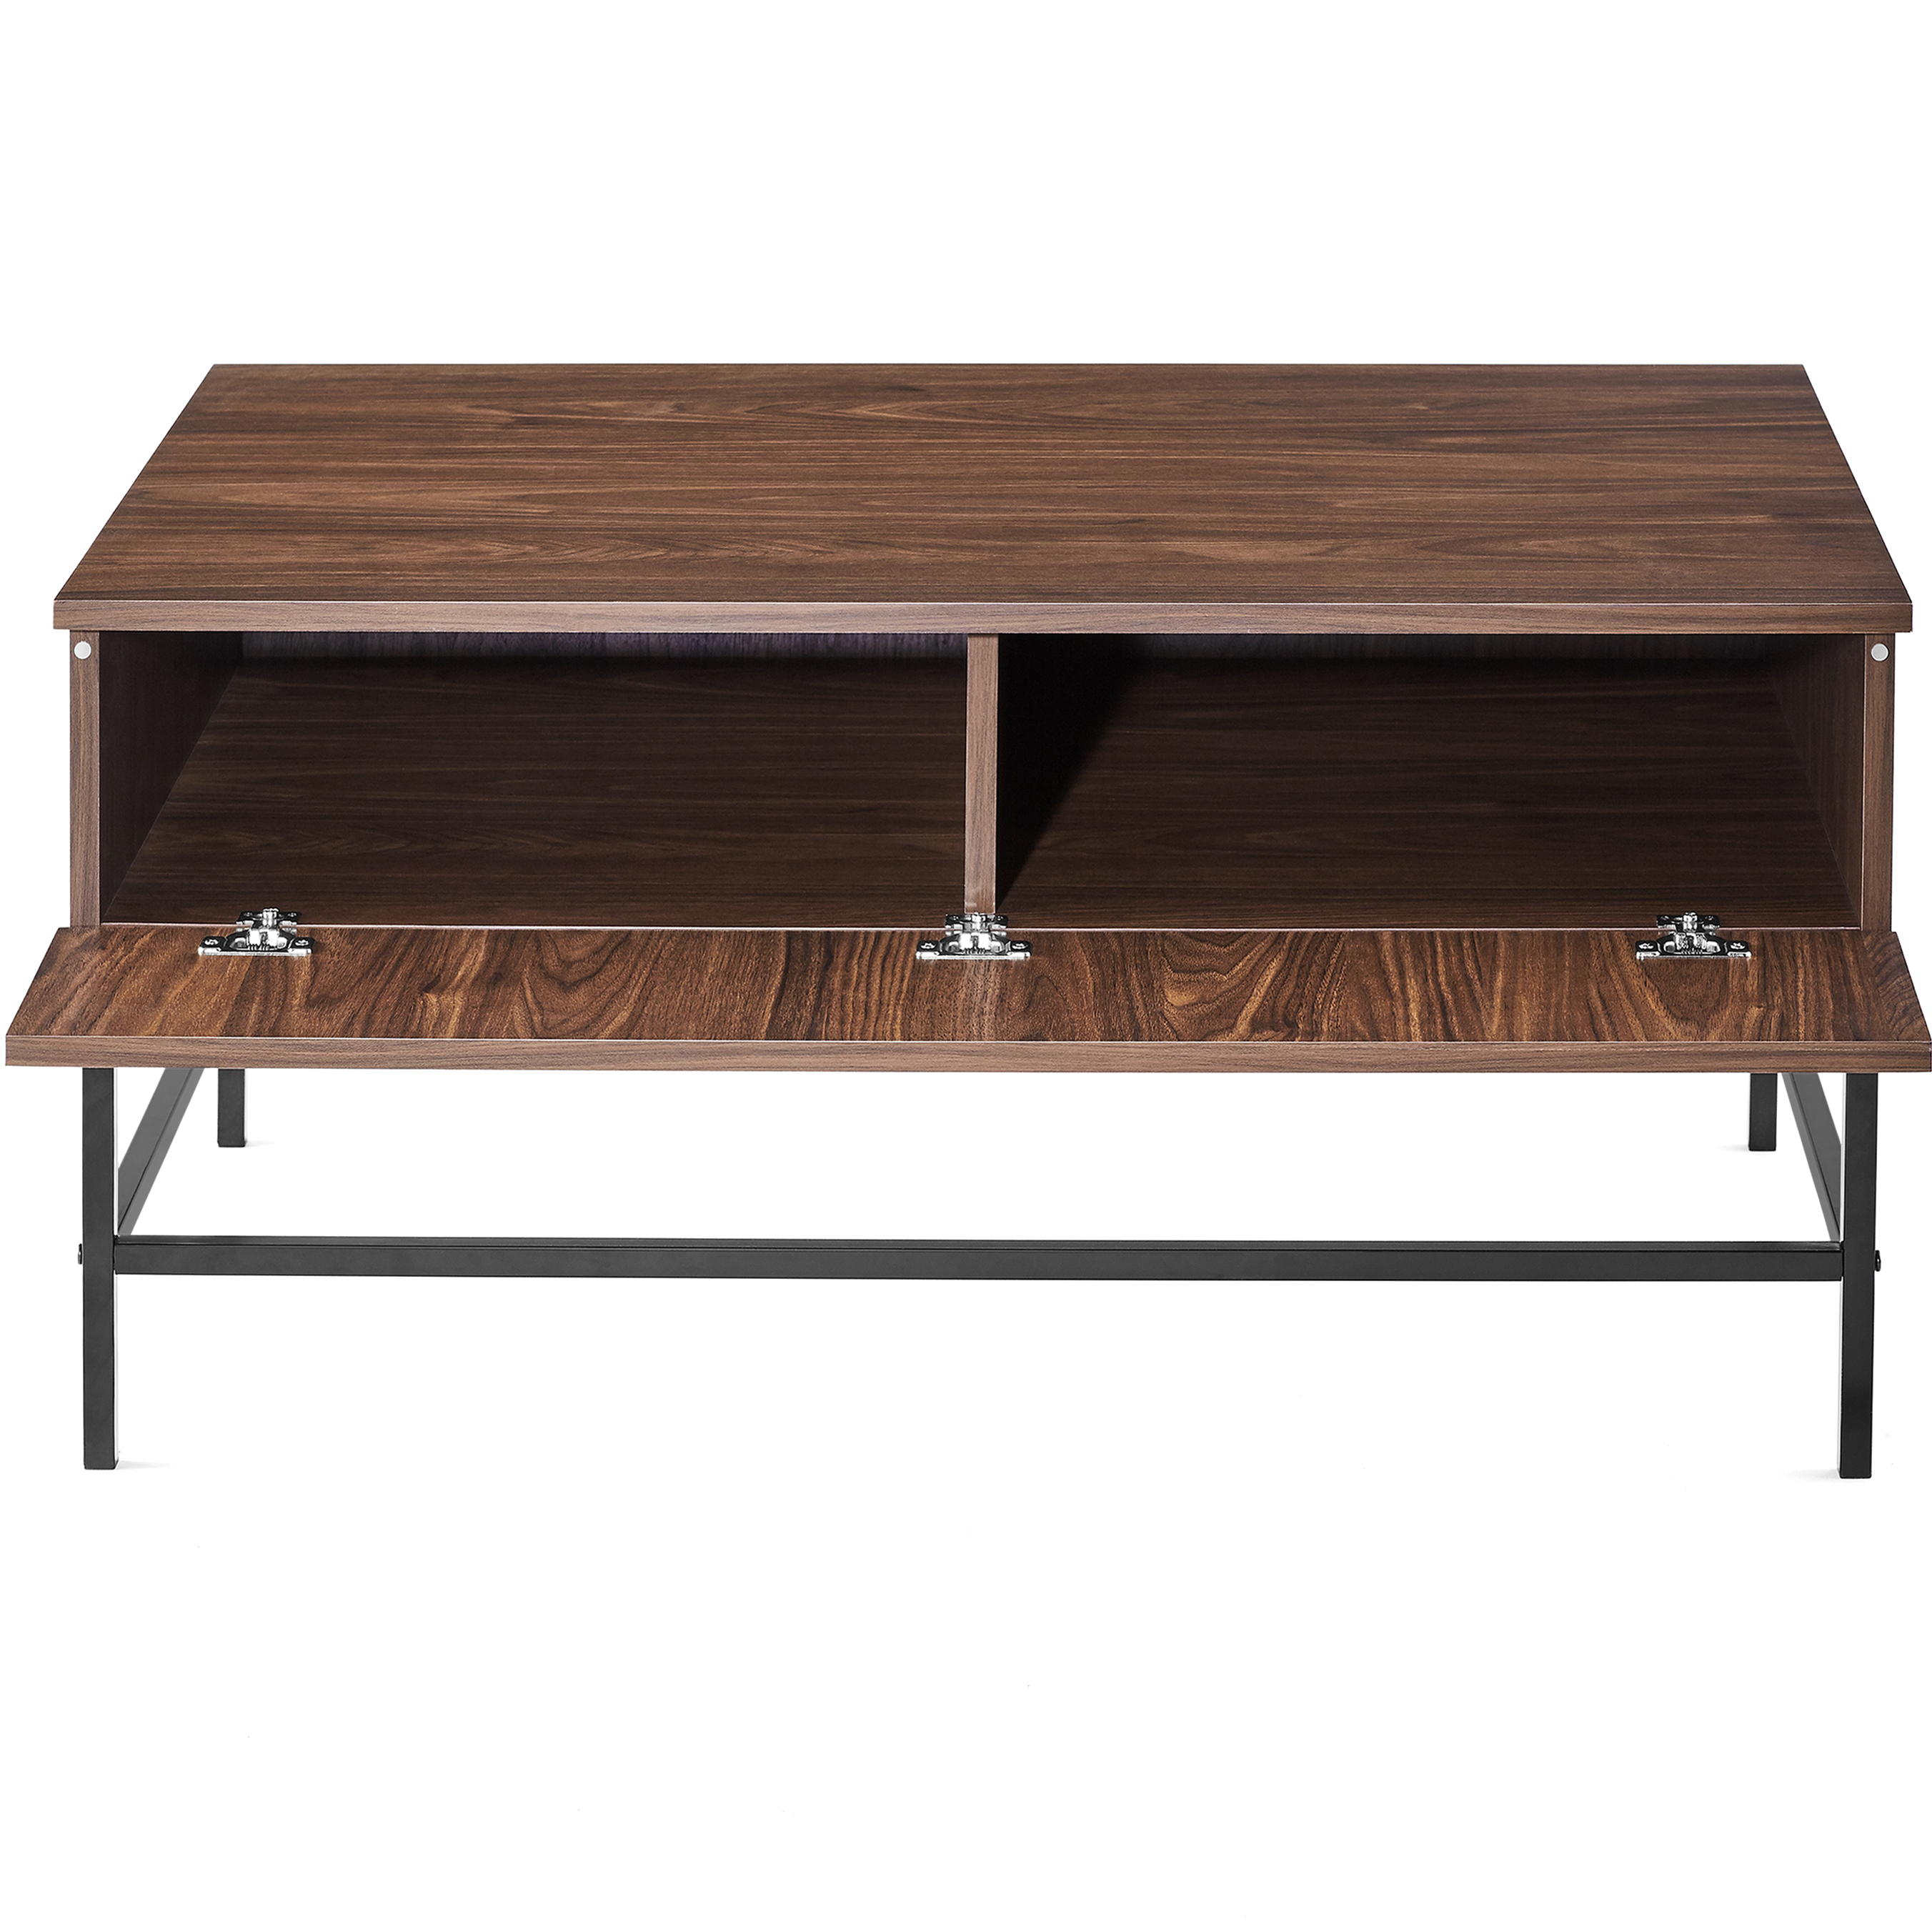 Mainstays Sumpter Park Coffee Table, Multiple Finishes - image 2 of 6